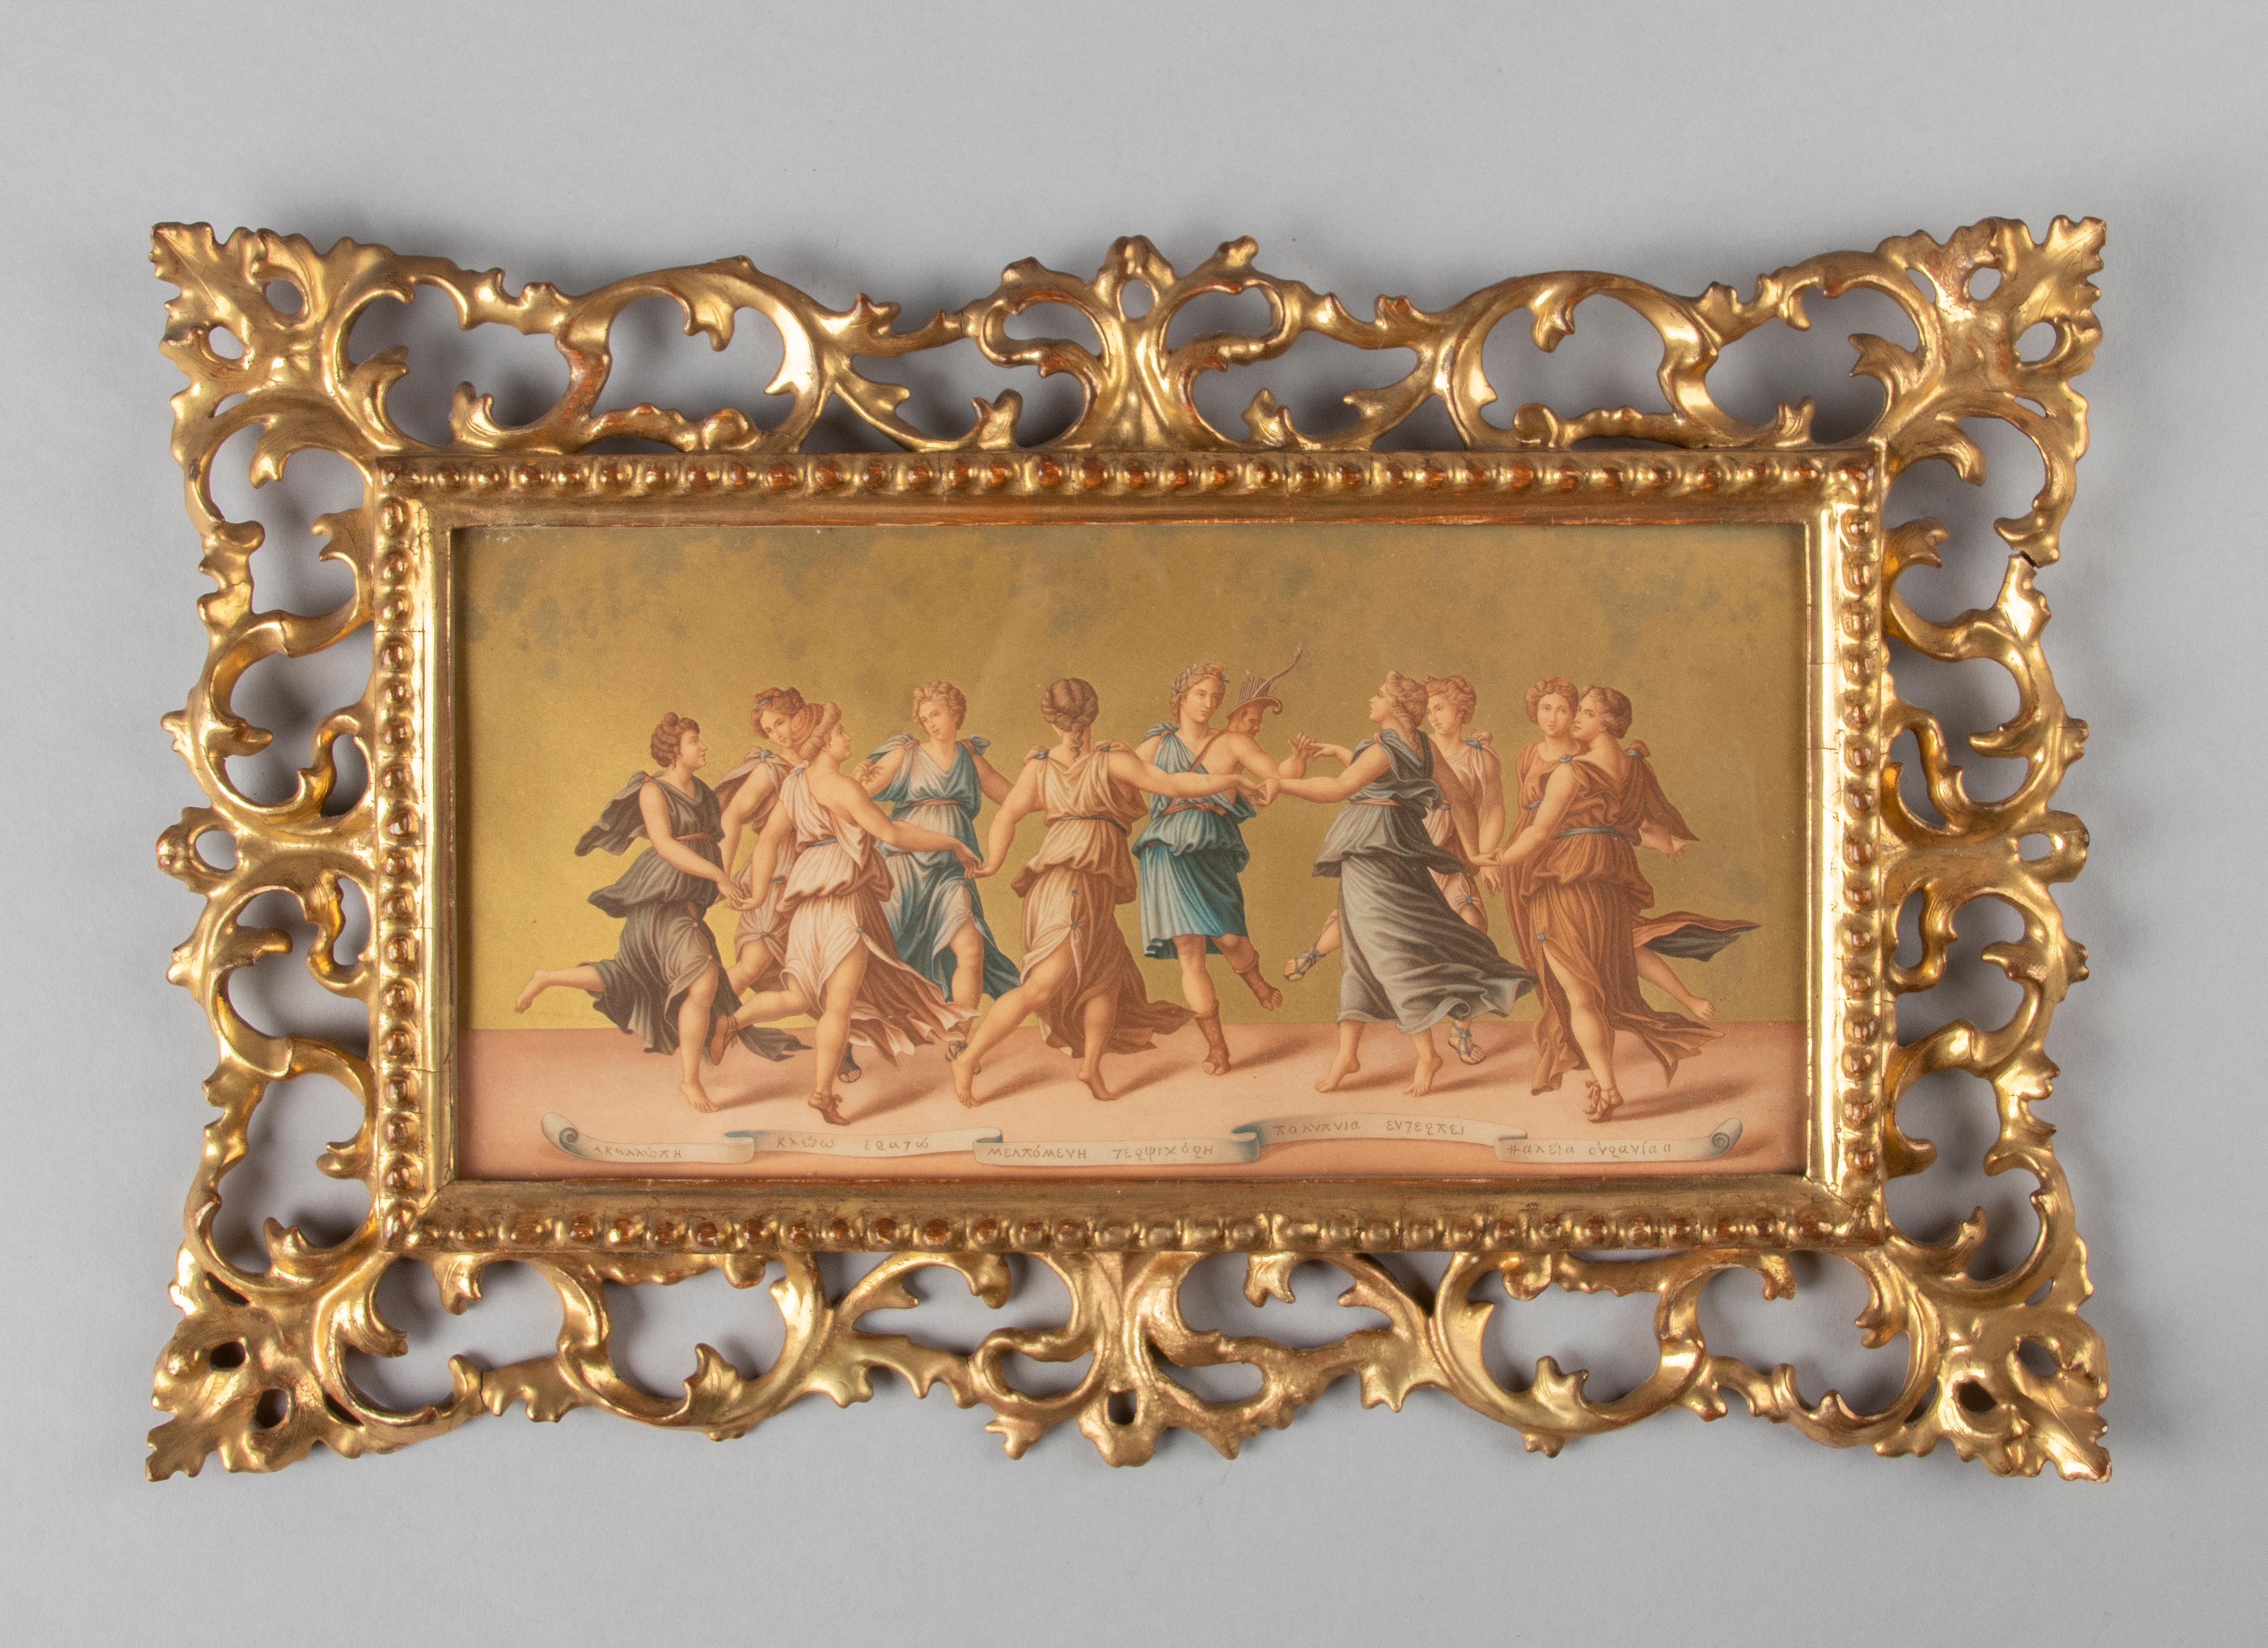 Beautiful antique frame with a print of dancing Greek graces. The frame is made of wood, with refined carving and graceful curls. The wood is decorated with stucco and gilded with gold leaf. The print is also interesting, it is an antique print with